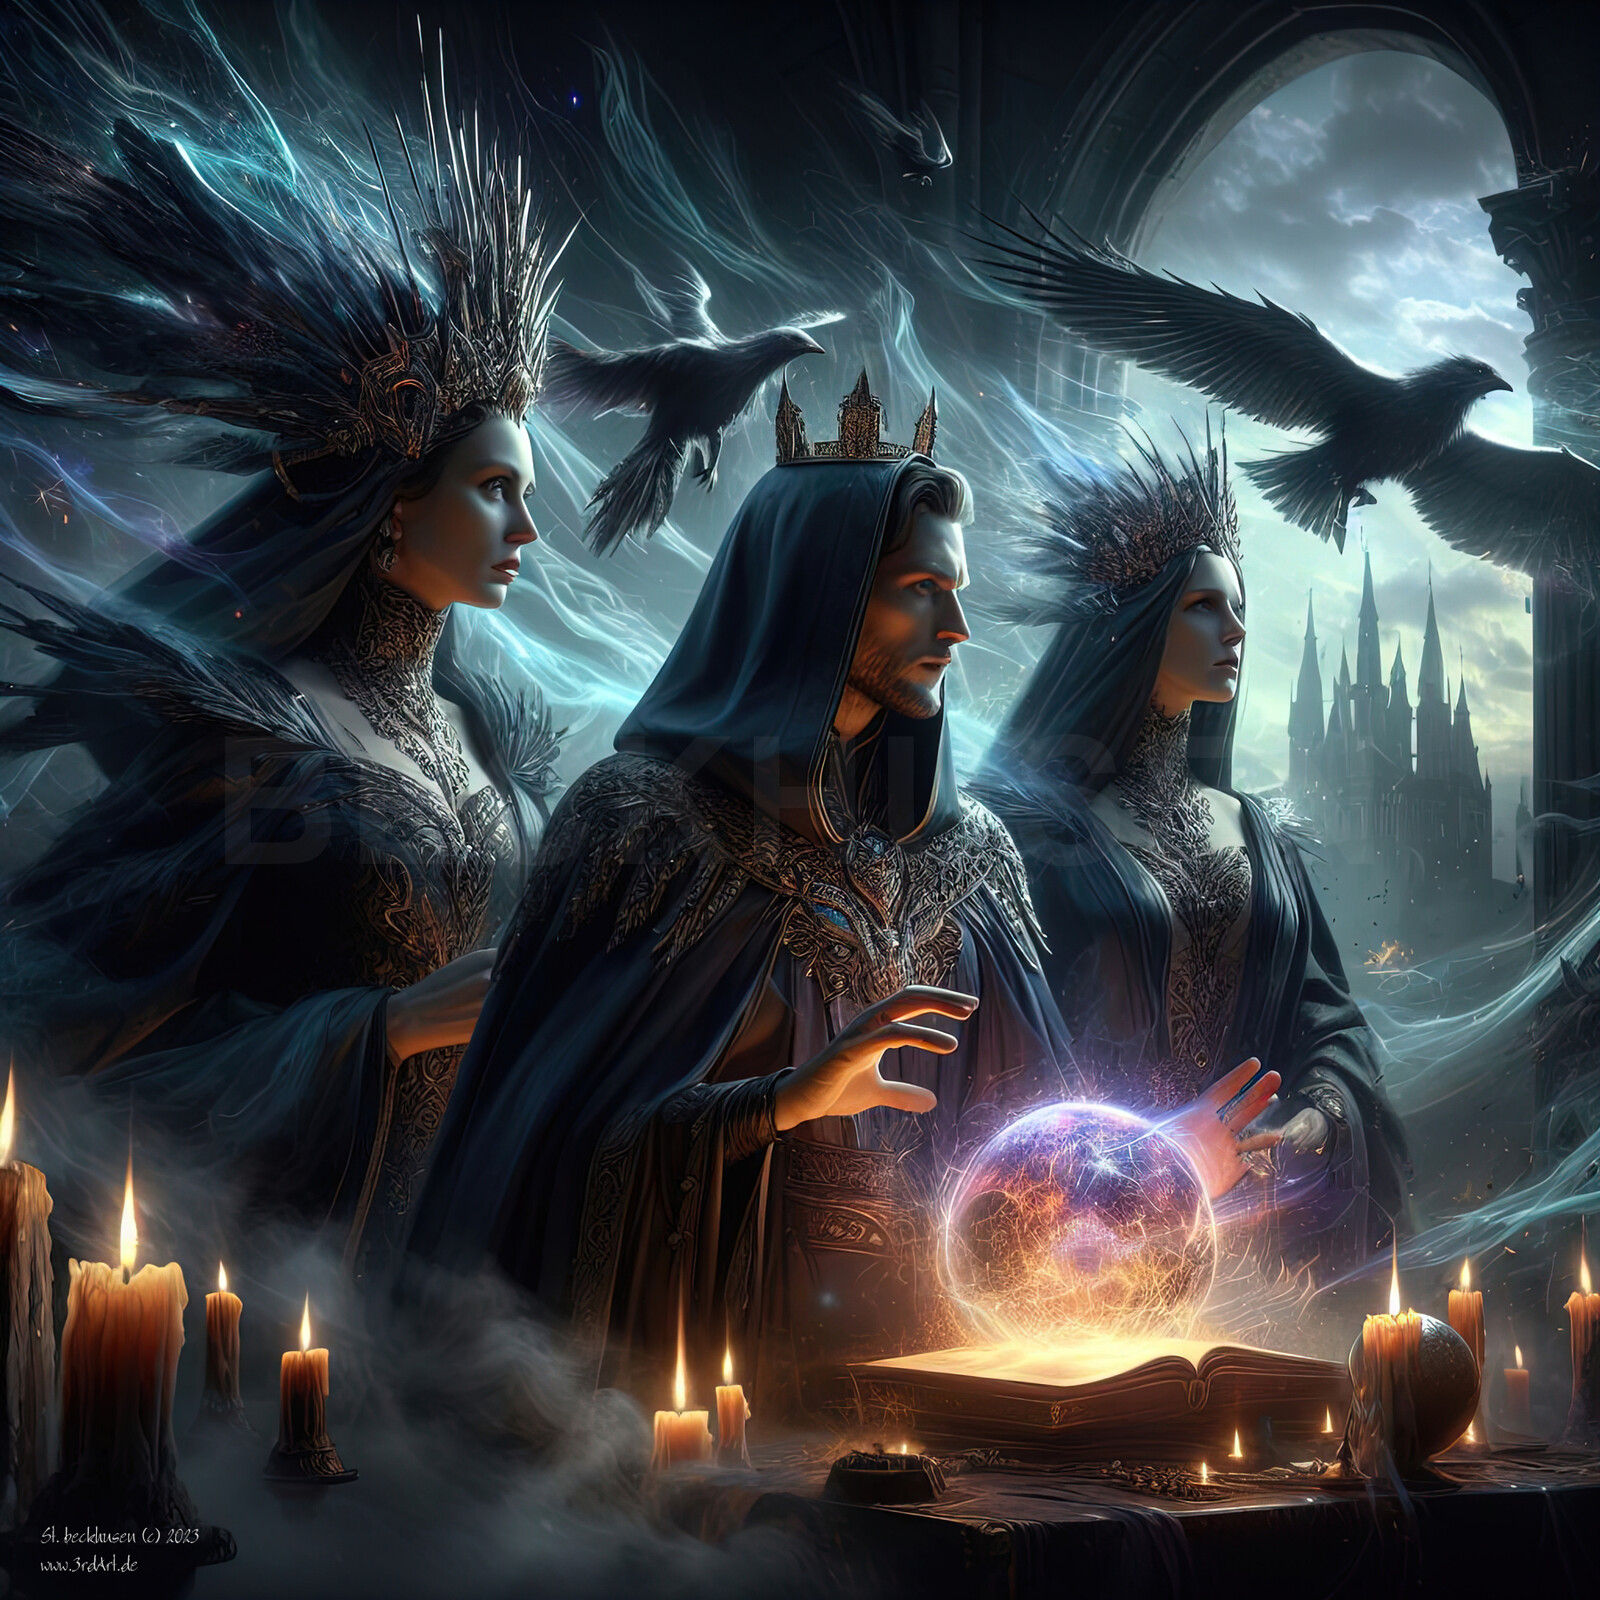 MACBETH MAGICS is a medieval scenery with witches and wizards. This set includes 4 amazing artworks for cover art or else. 
https://www.artstation.com/marketplace/p/wjWz6/macbeth-magics